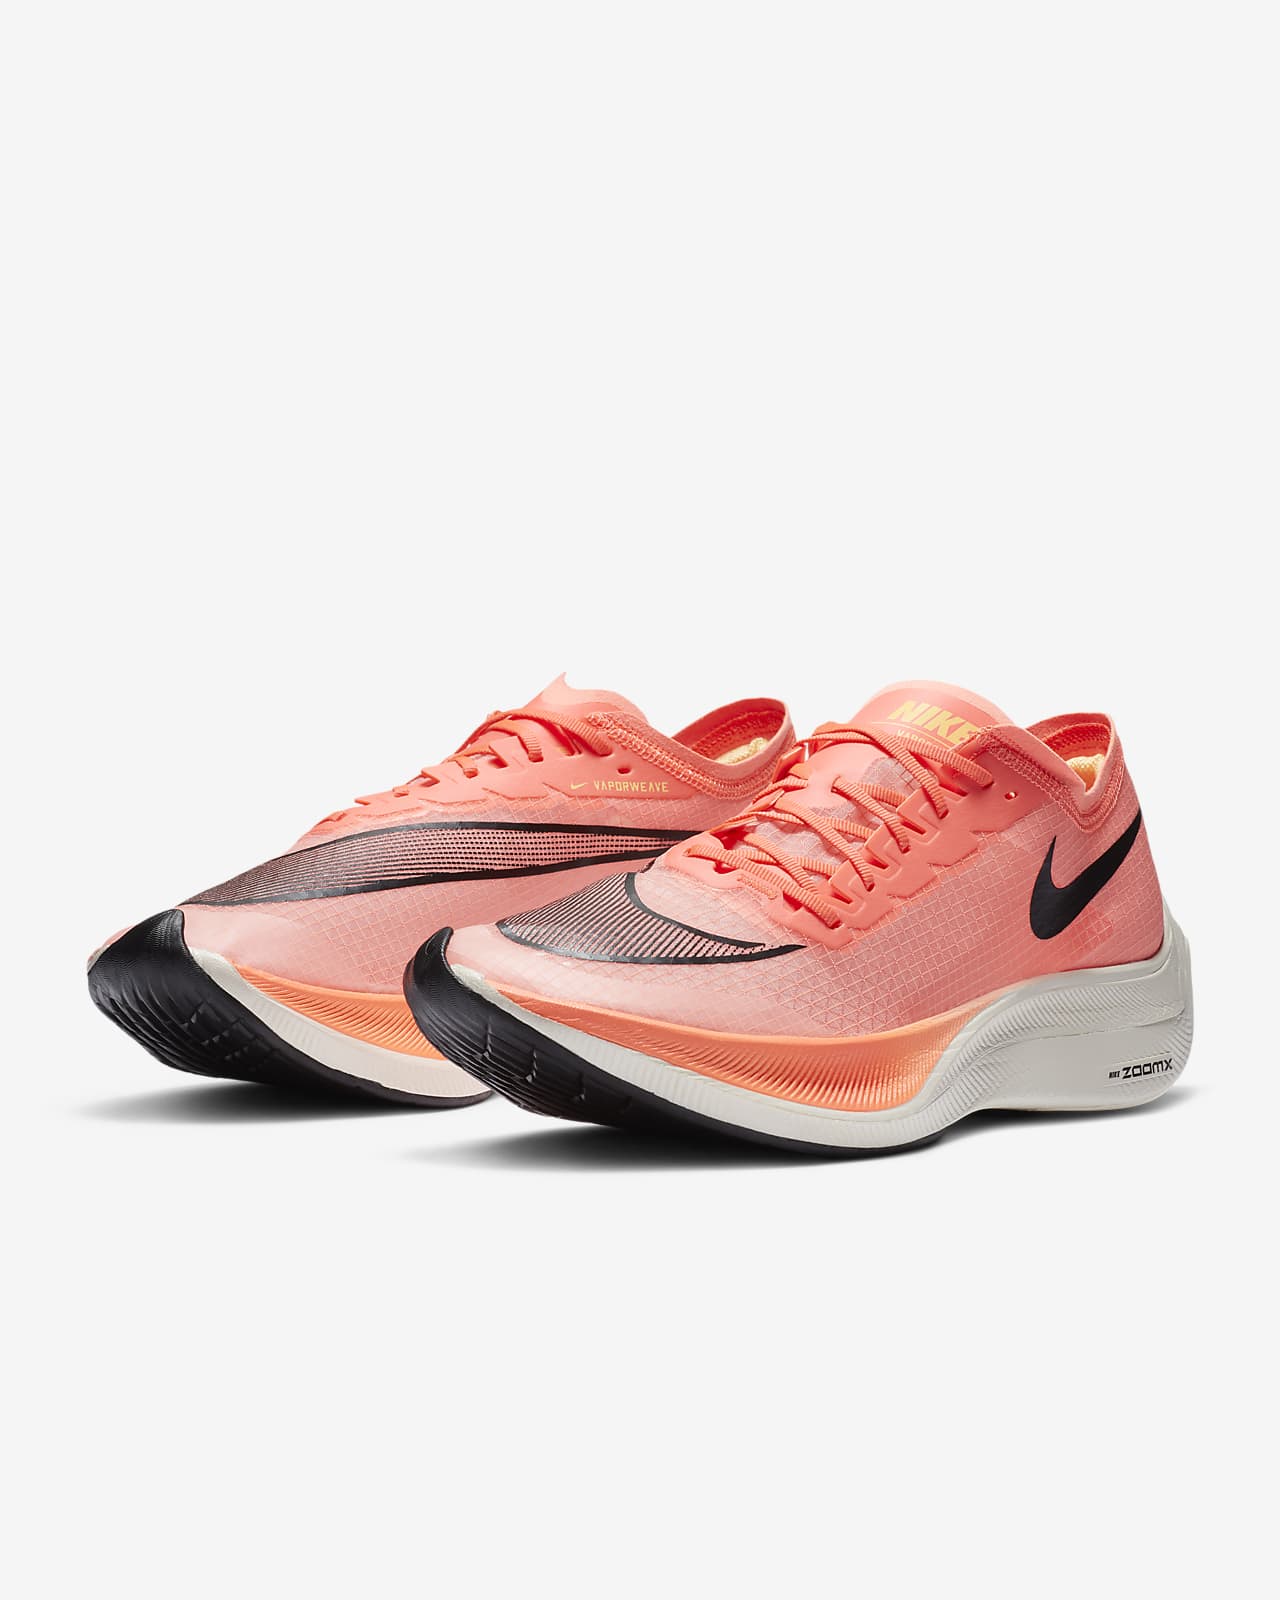 nike zoomx next percent review